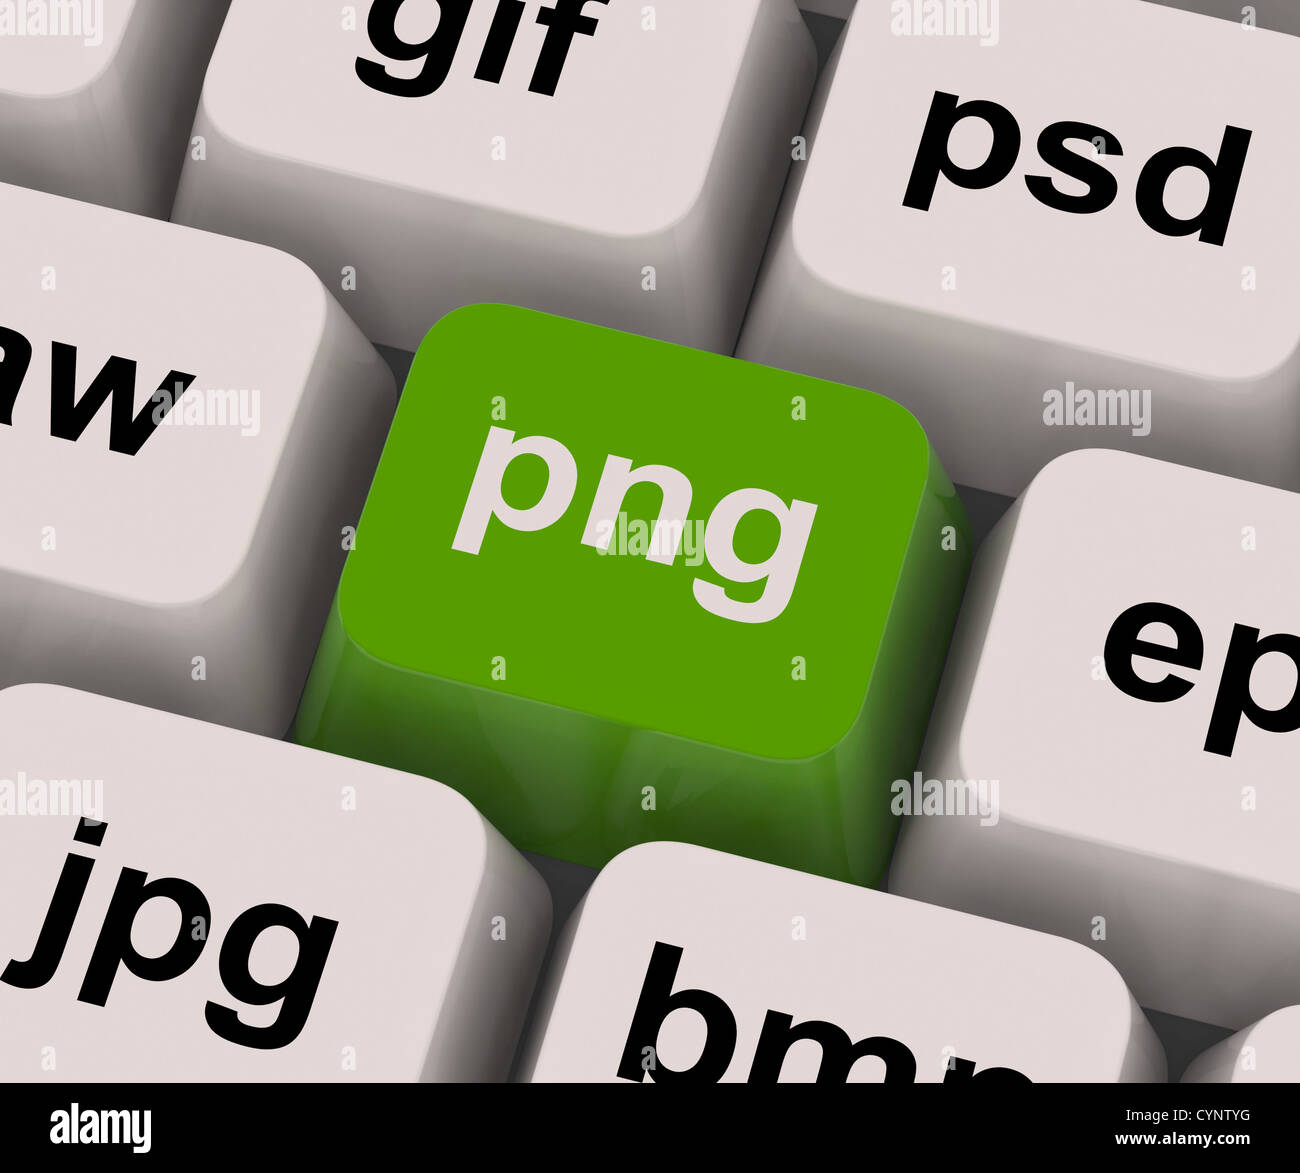 Png Key Showing Picture Format For Images Stock Photo